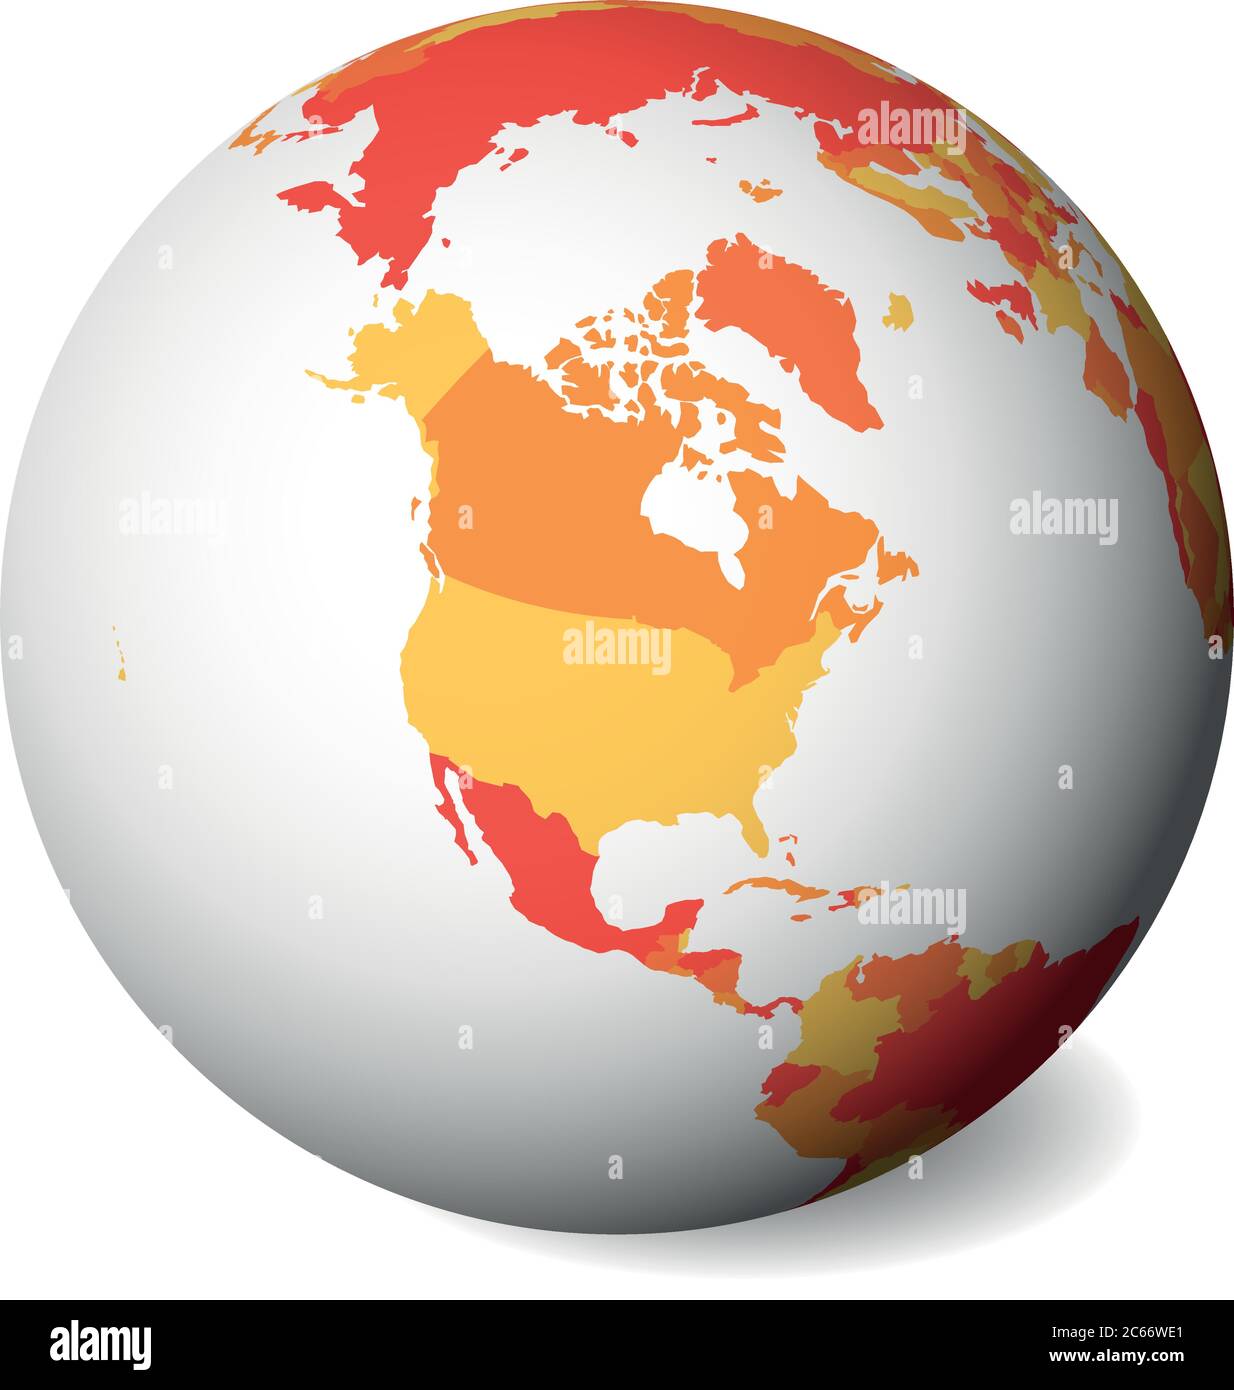 Blank political map of North America. 3D Earth globe with orange map. Vector illustration. Stock Vector